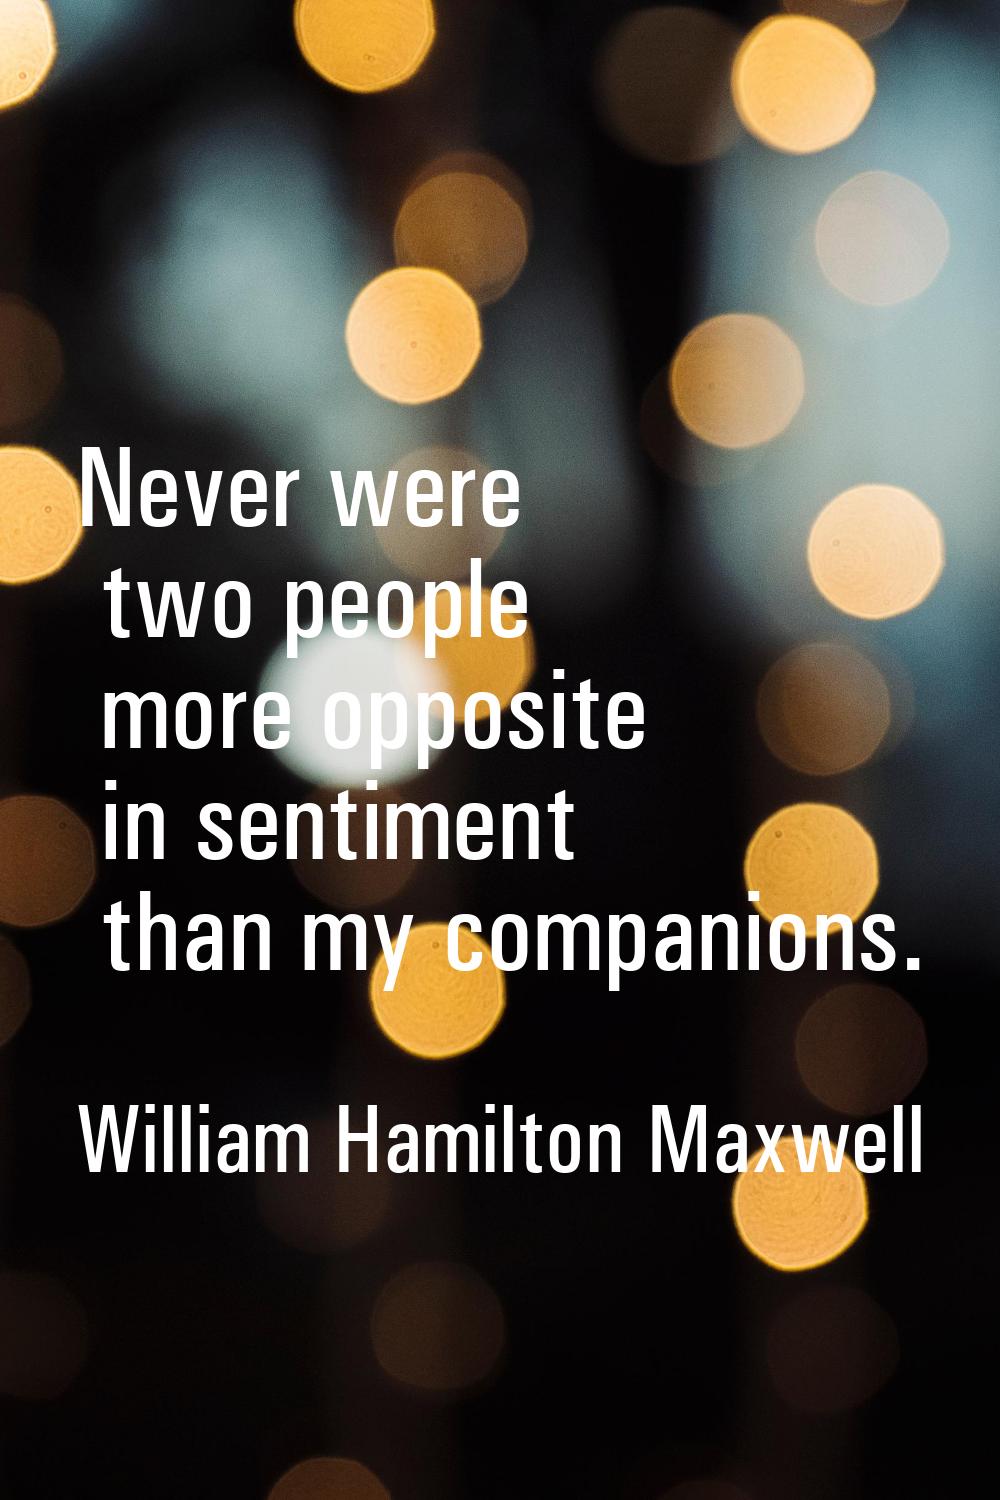 Never were two people more opposite in sentiment than my companions.